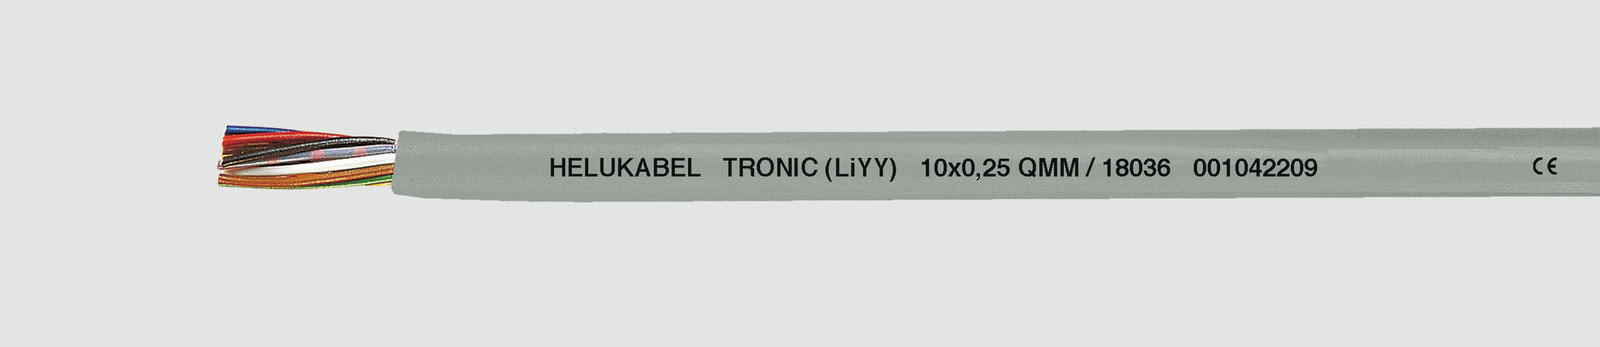 Helukabel TRONIC (LiYY) - Low voltage cable - Grey - Polyvinyl chloride (PVC) - Cooper - 0.14 mm² - 2.7 kg/km